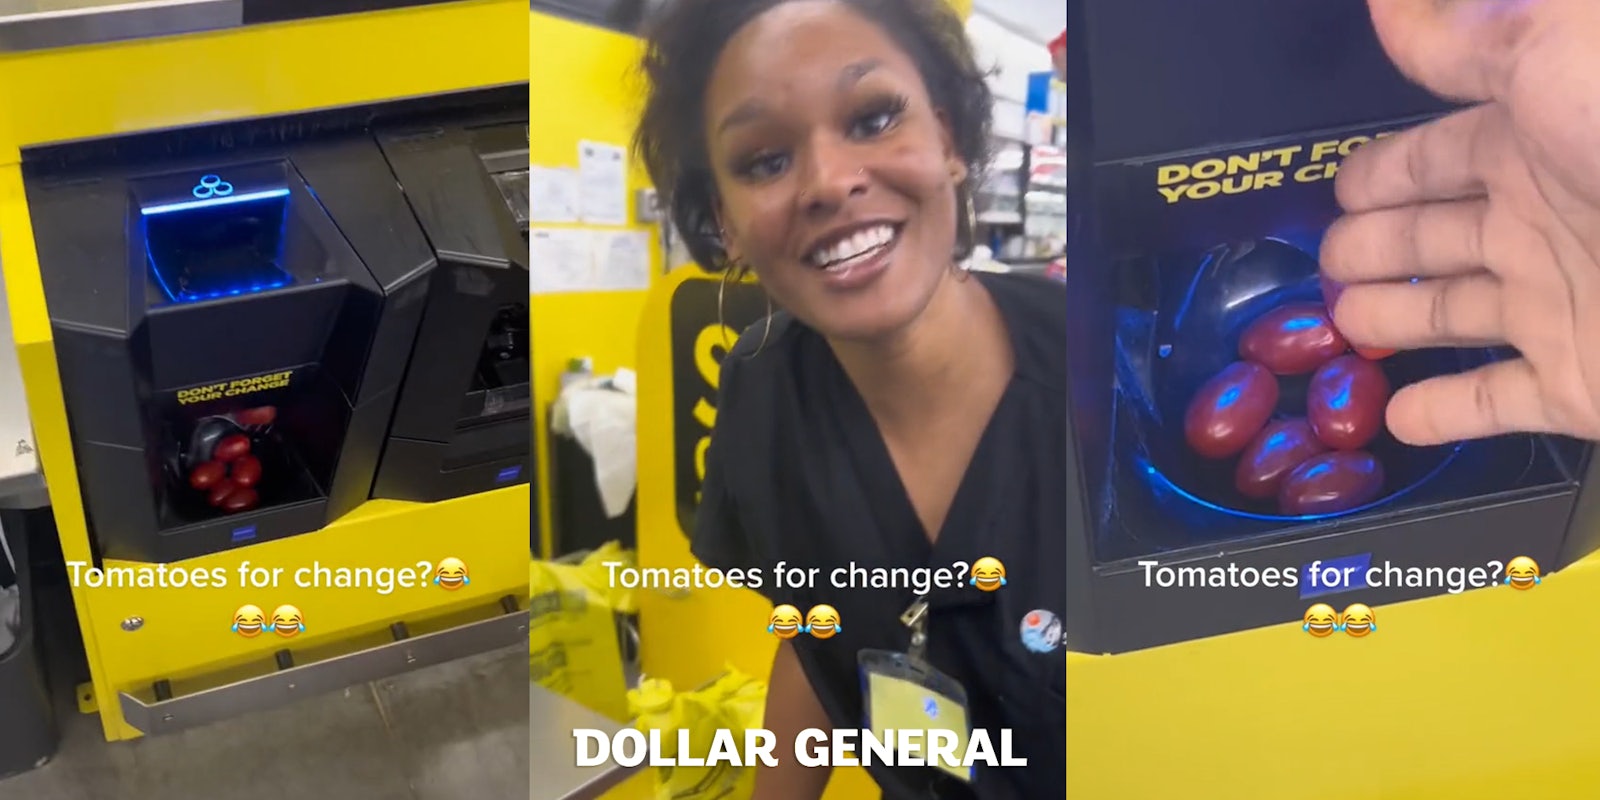 Dollar General self checkout with tomatoes in change dispenser with caption 'Tomatoes for change?' (l) woman laughing in Dollar General with logo at bottom and caption 'Tomatoes for change?' (c) Dollar General self checkout with tomatoes in change dispenser with caption 'Tomatoes for change?' (r)